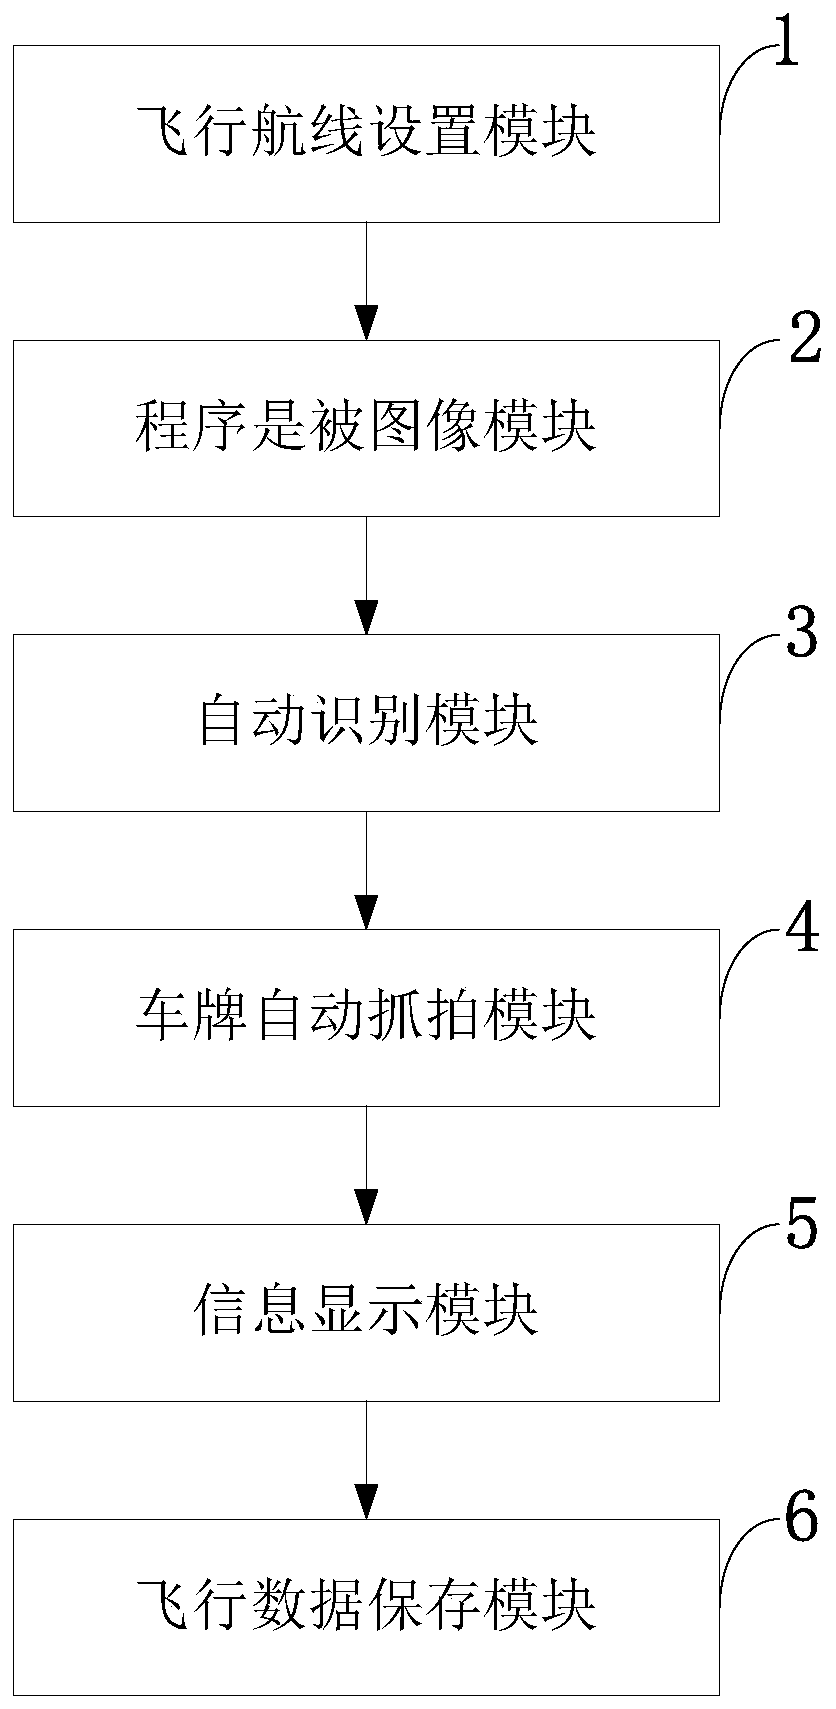 Unmanned aerial vehicle inspection control method and system, storage medium, program and terminal